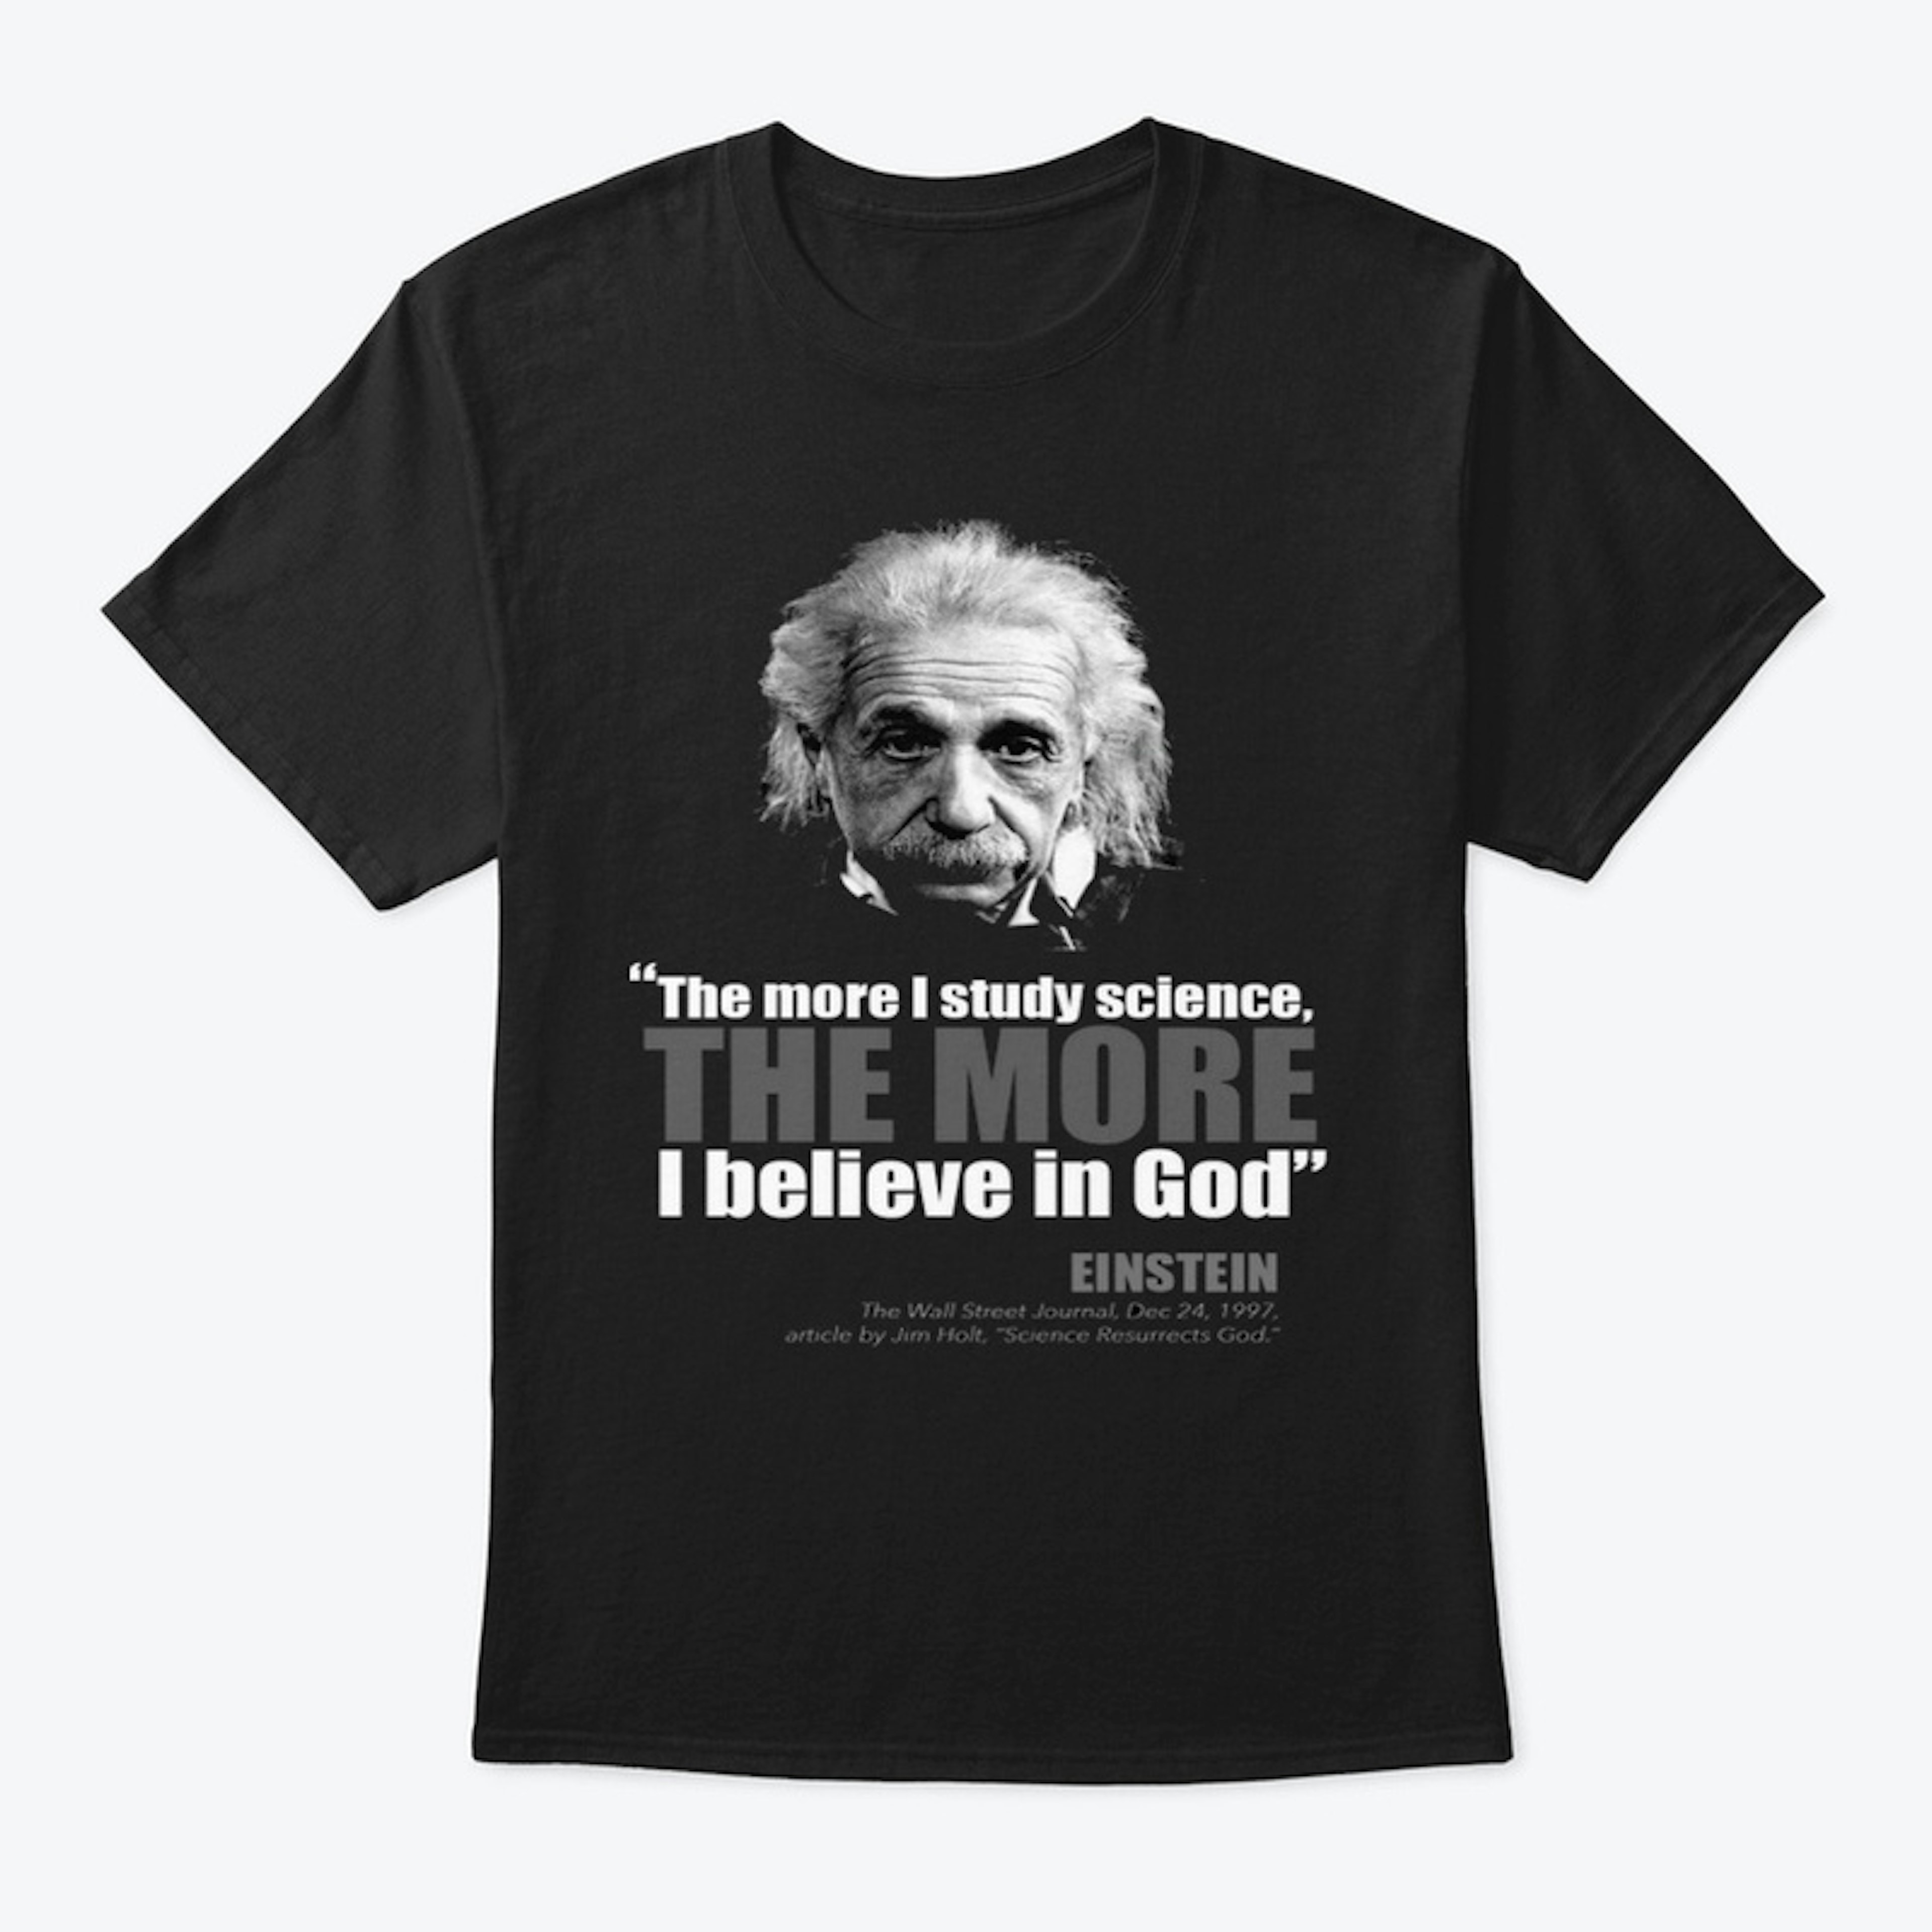 God and Science Shirt